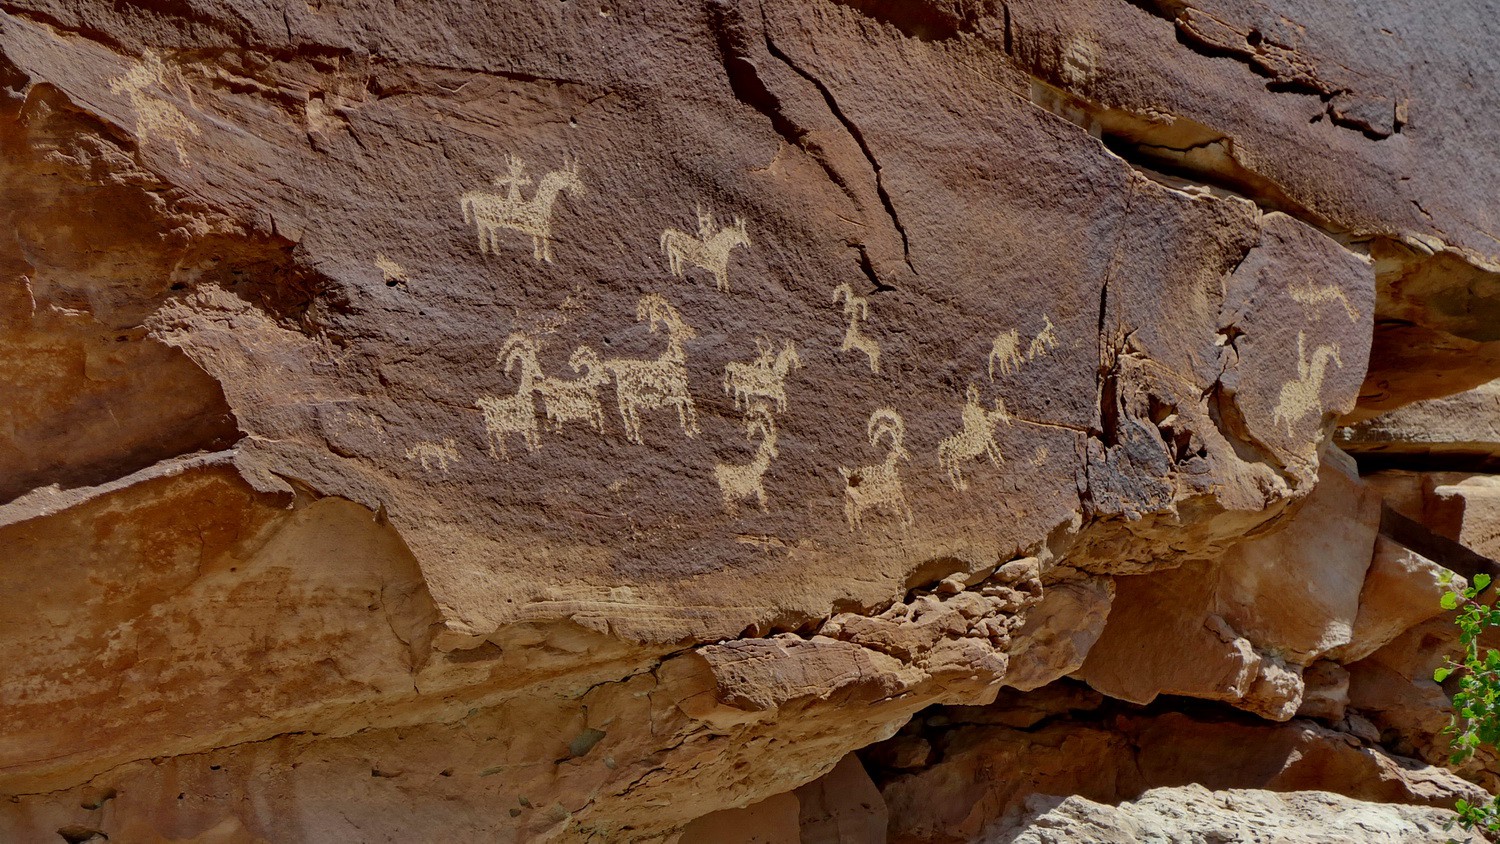 Ute Rock Art carved between 1650 AD and 1850 AD